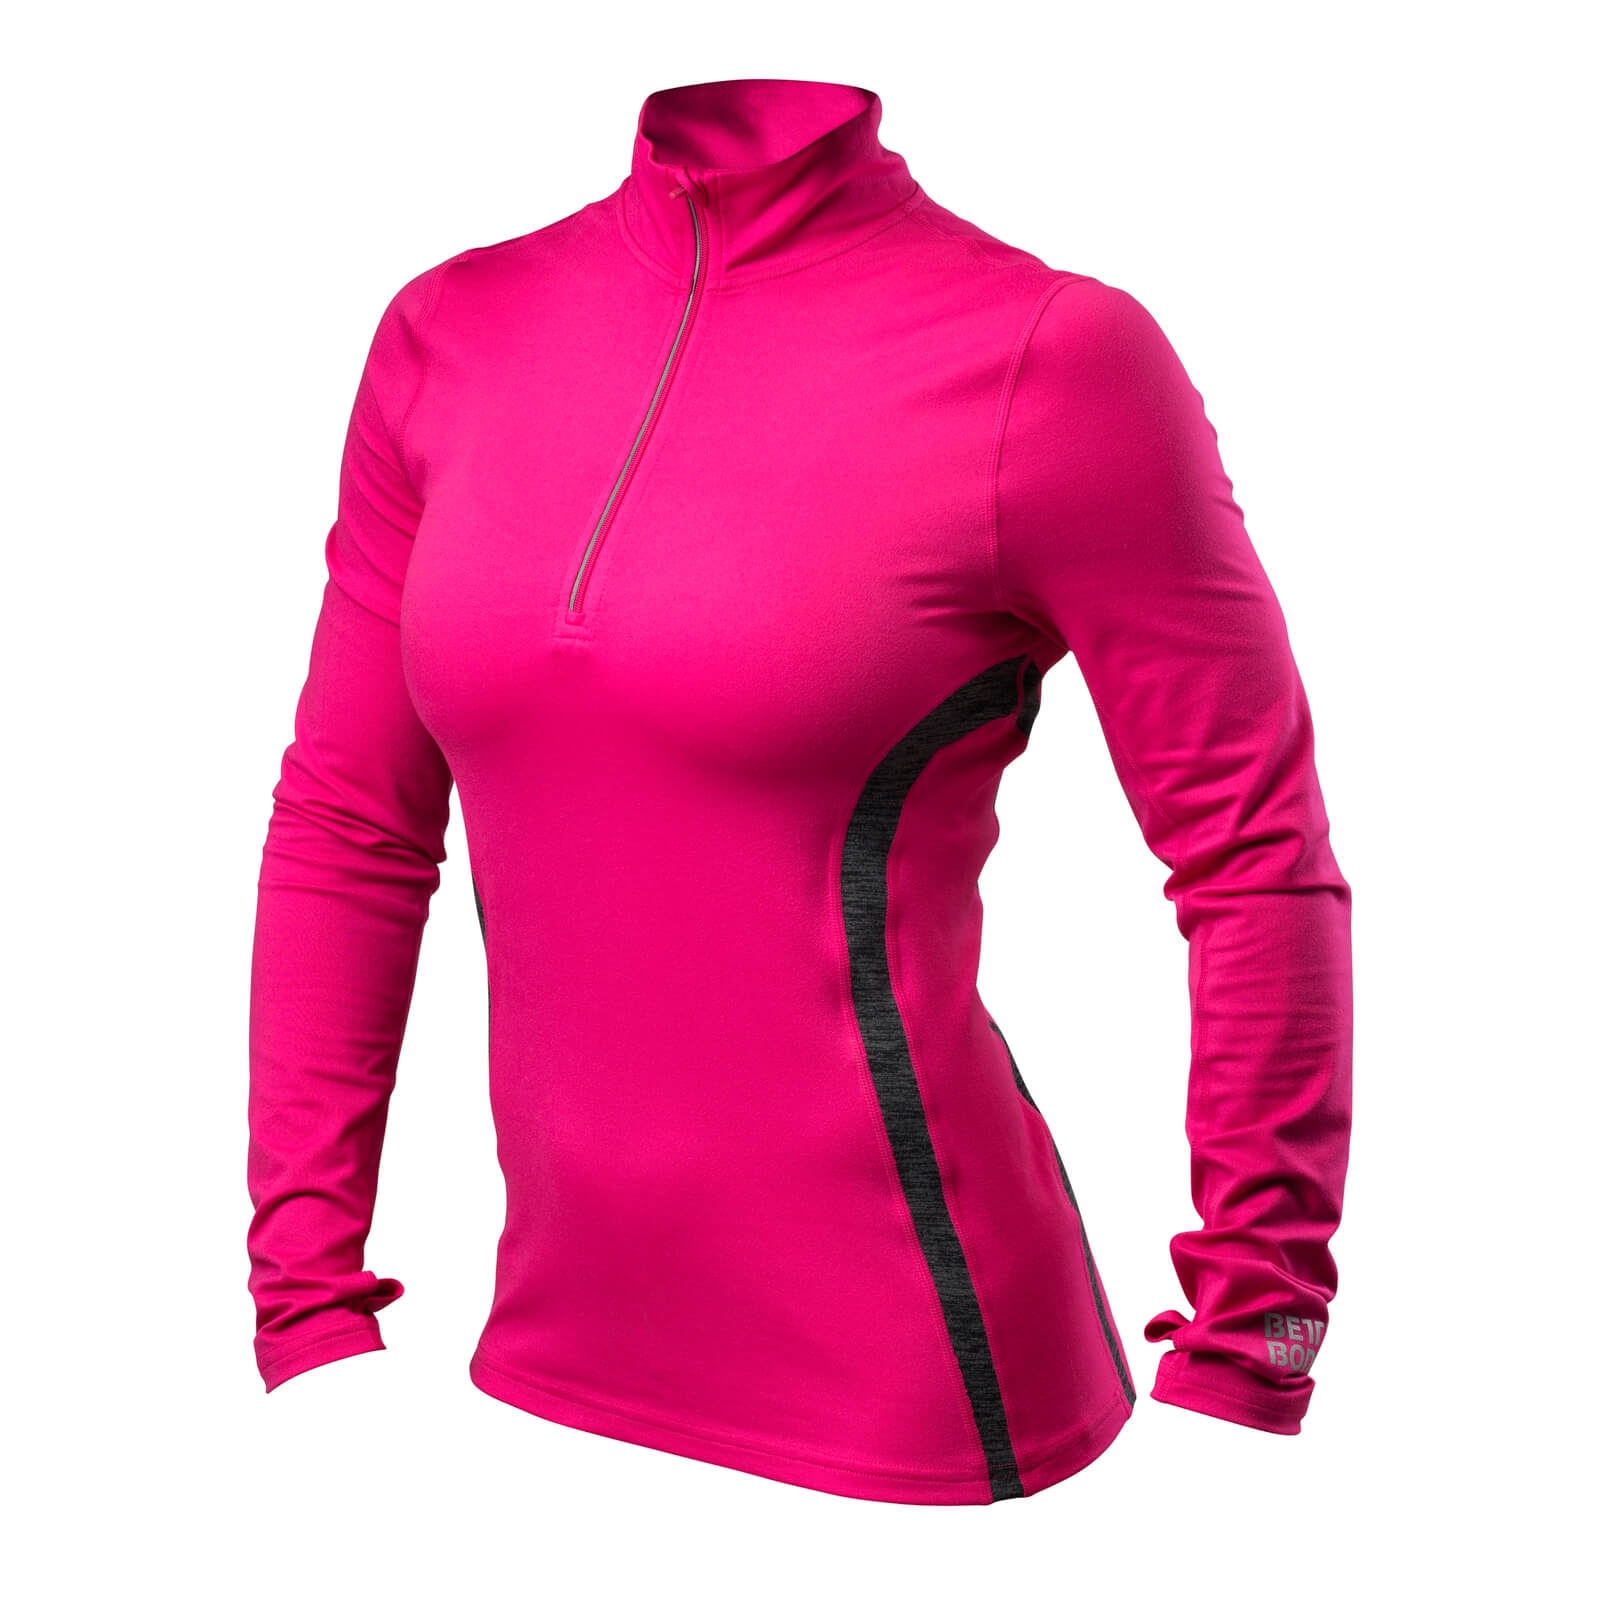 Performance Mid L/S, hot pink, Better Bodies